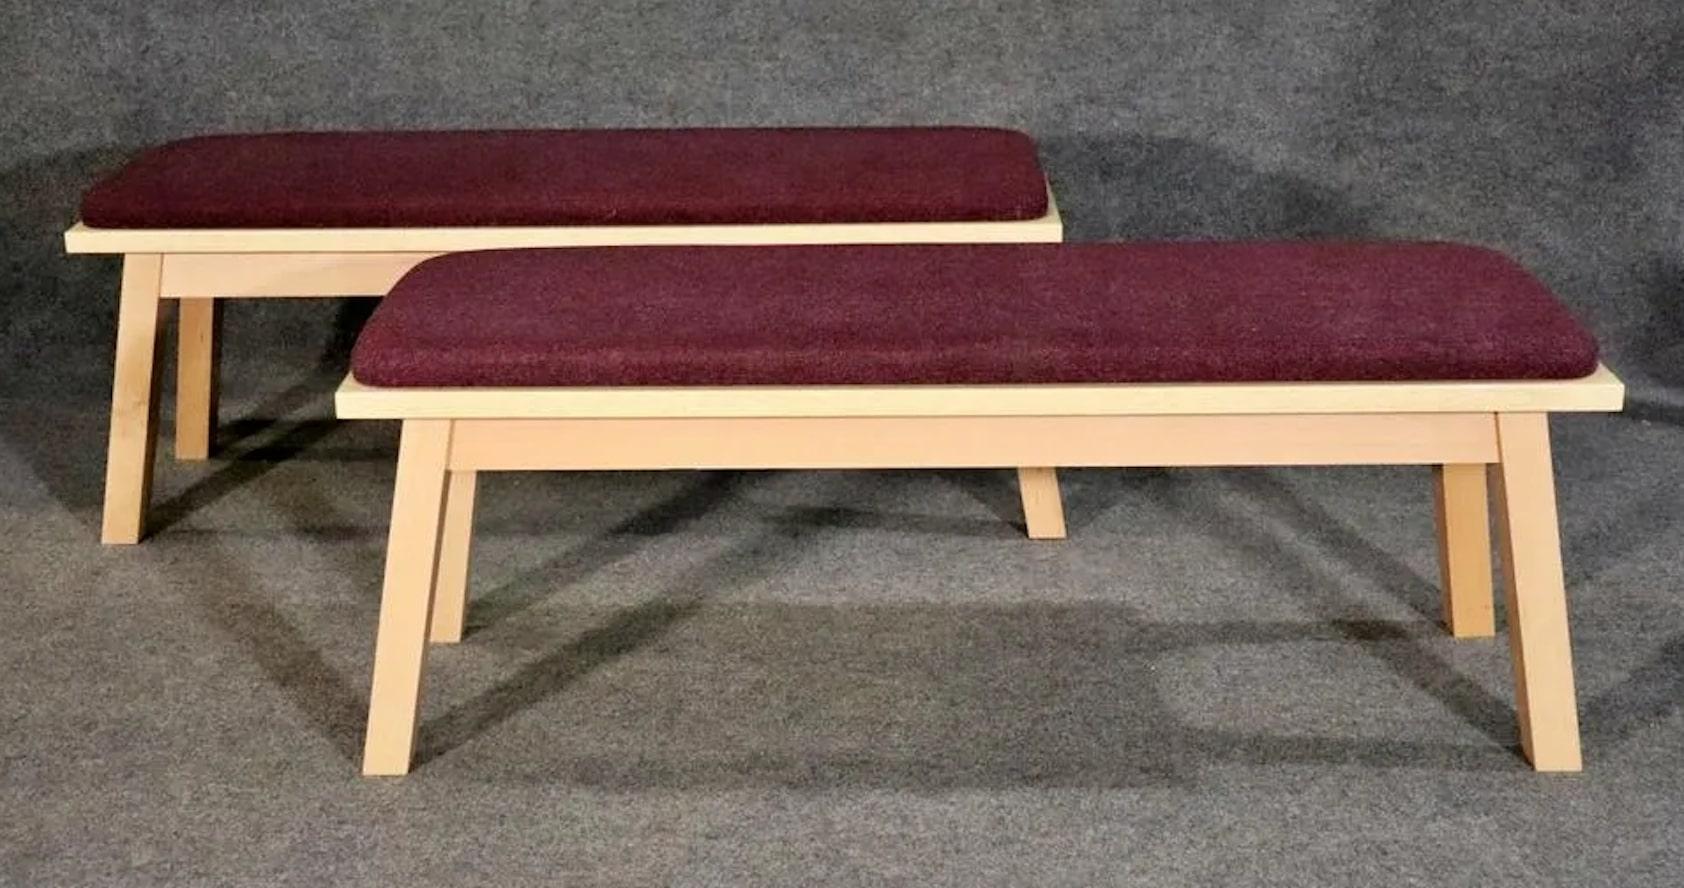 Listing is for 1 of 2 window benches. Wood frame with fabric seat.
Please confirm location NY or NJ.